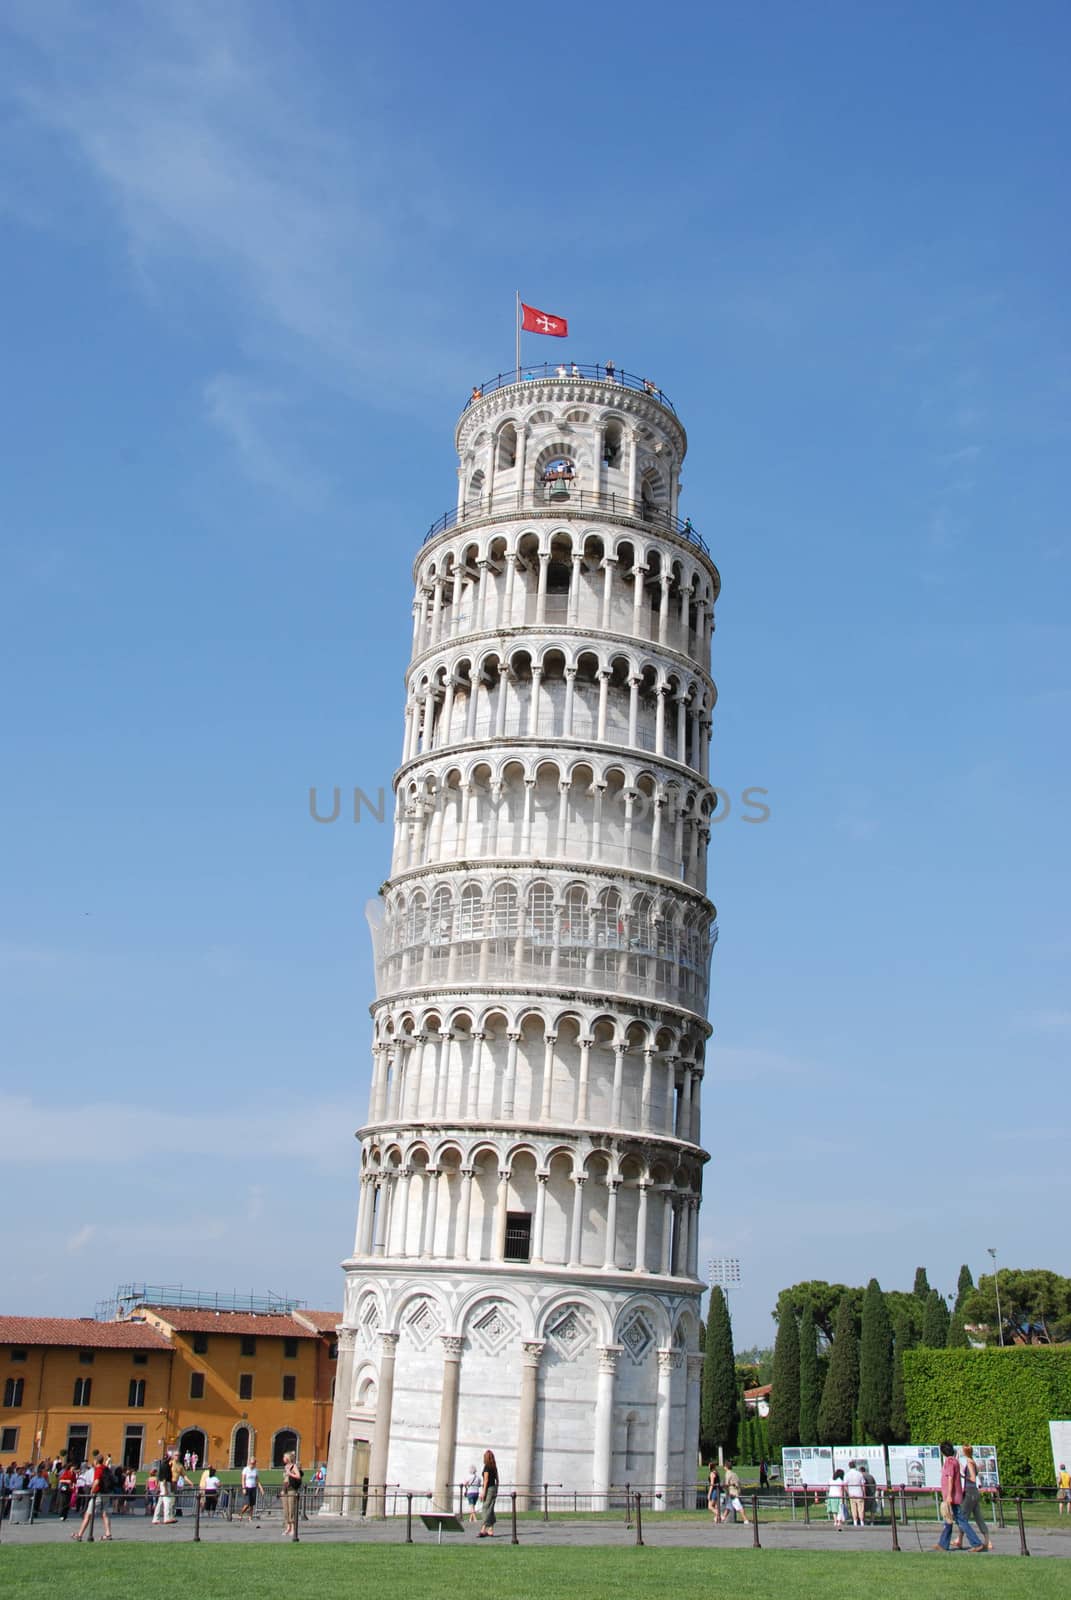 The leaning tower of Pisa in the Miracle Place